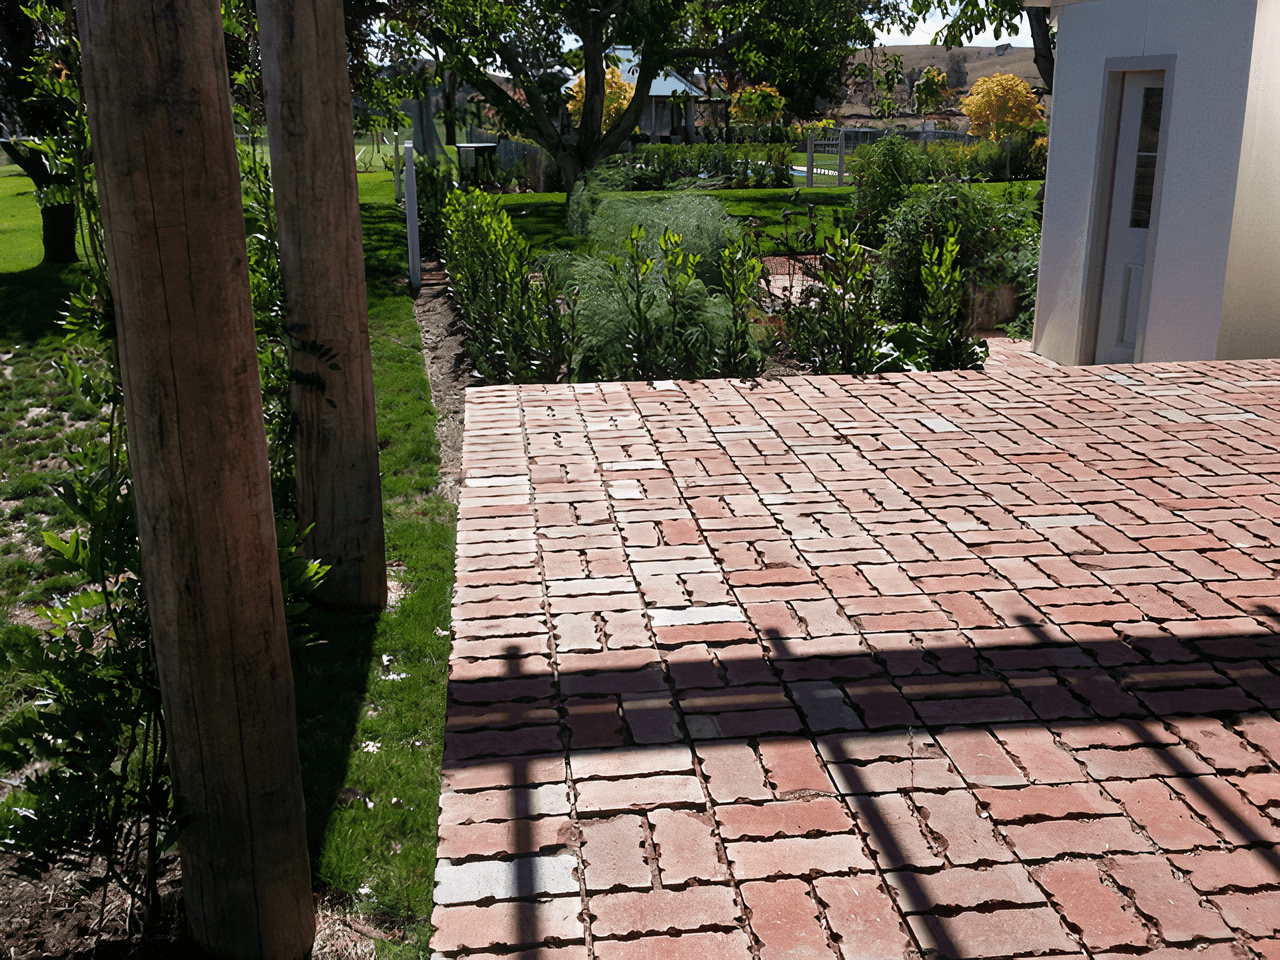 A beautiful brick paved outdoor patio by Dan and Dan Landscaping